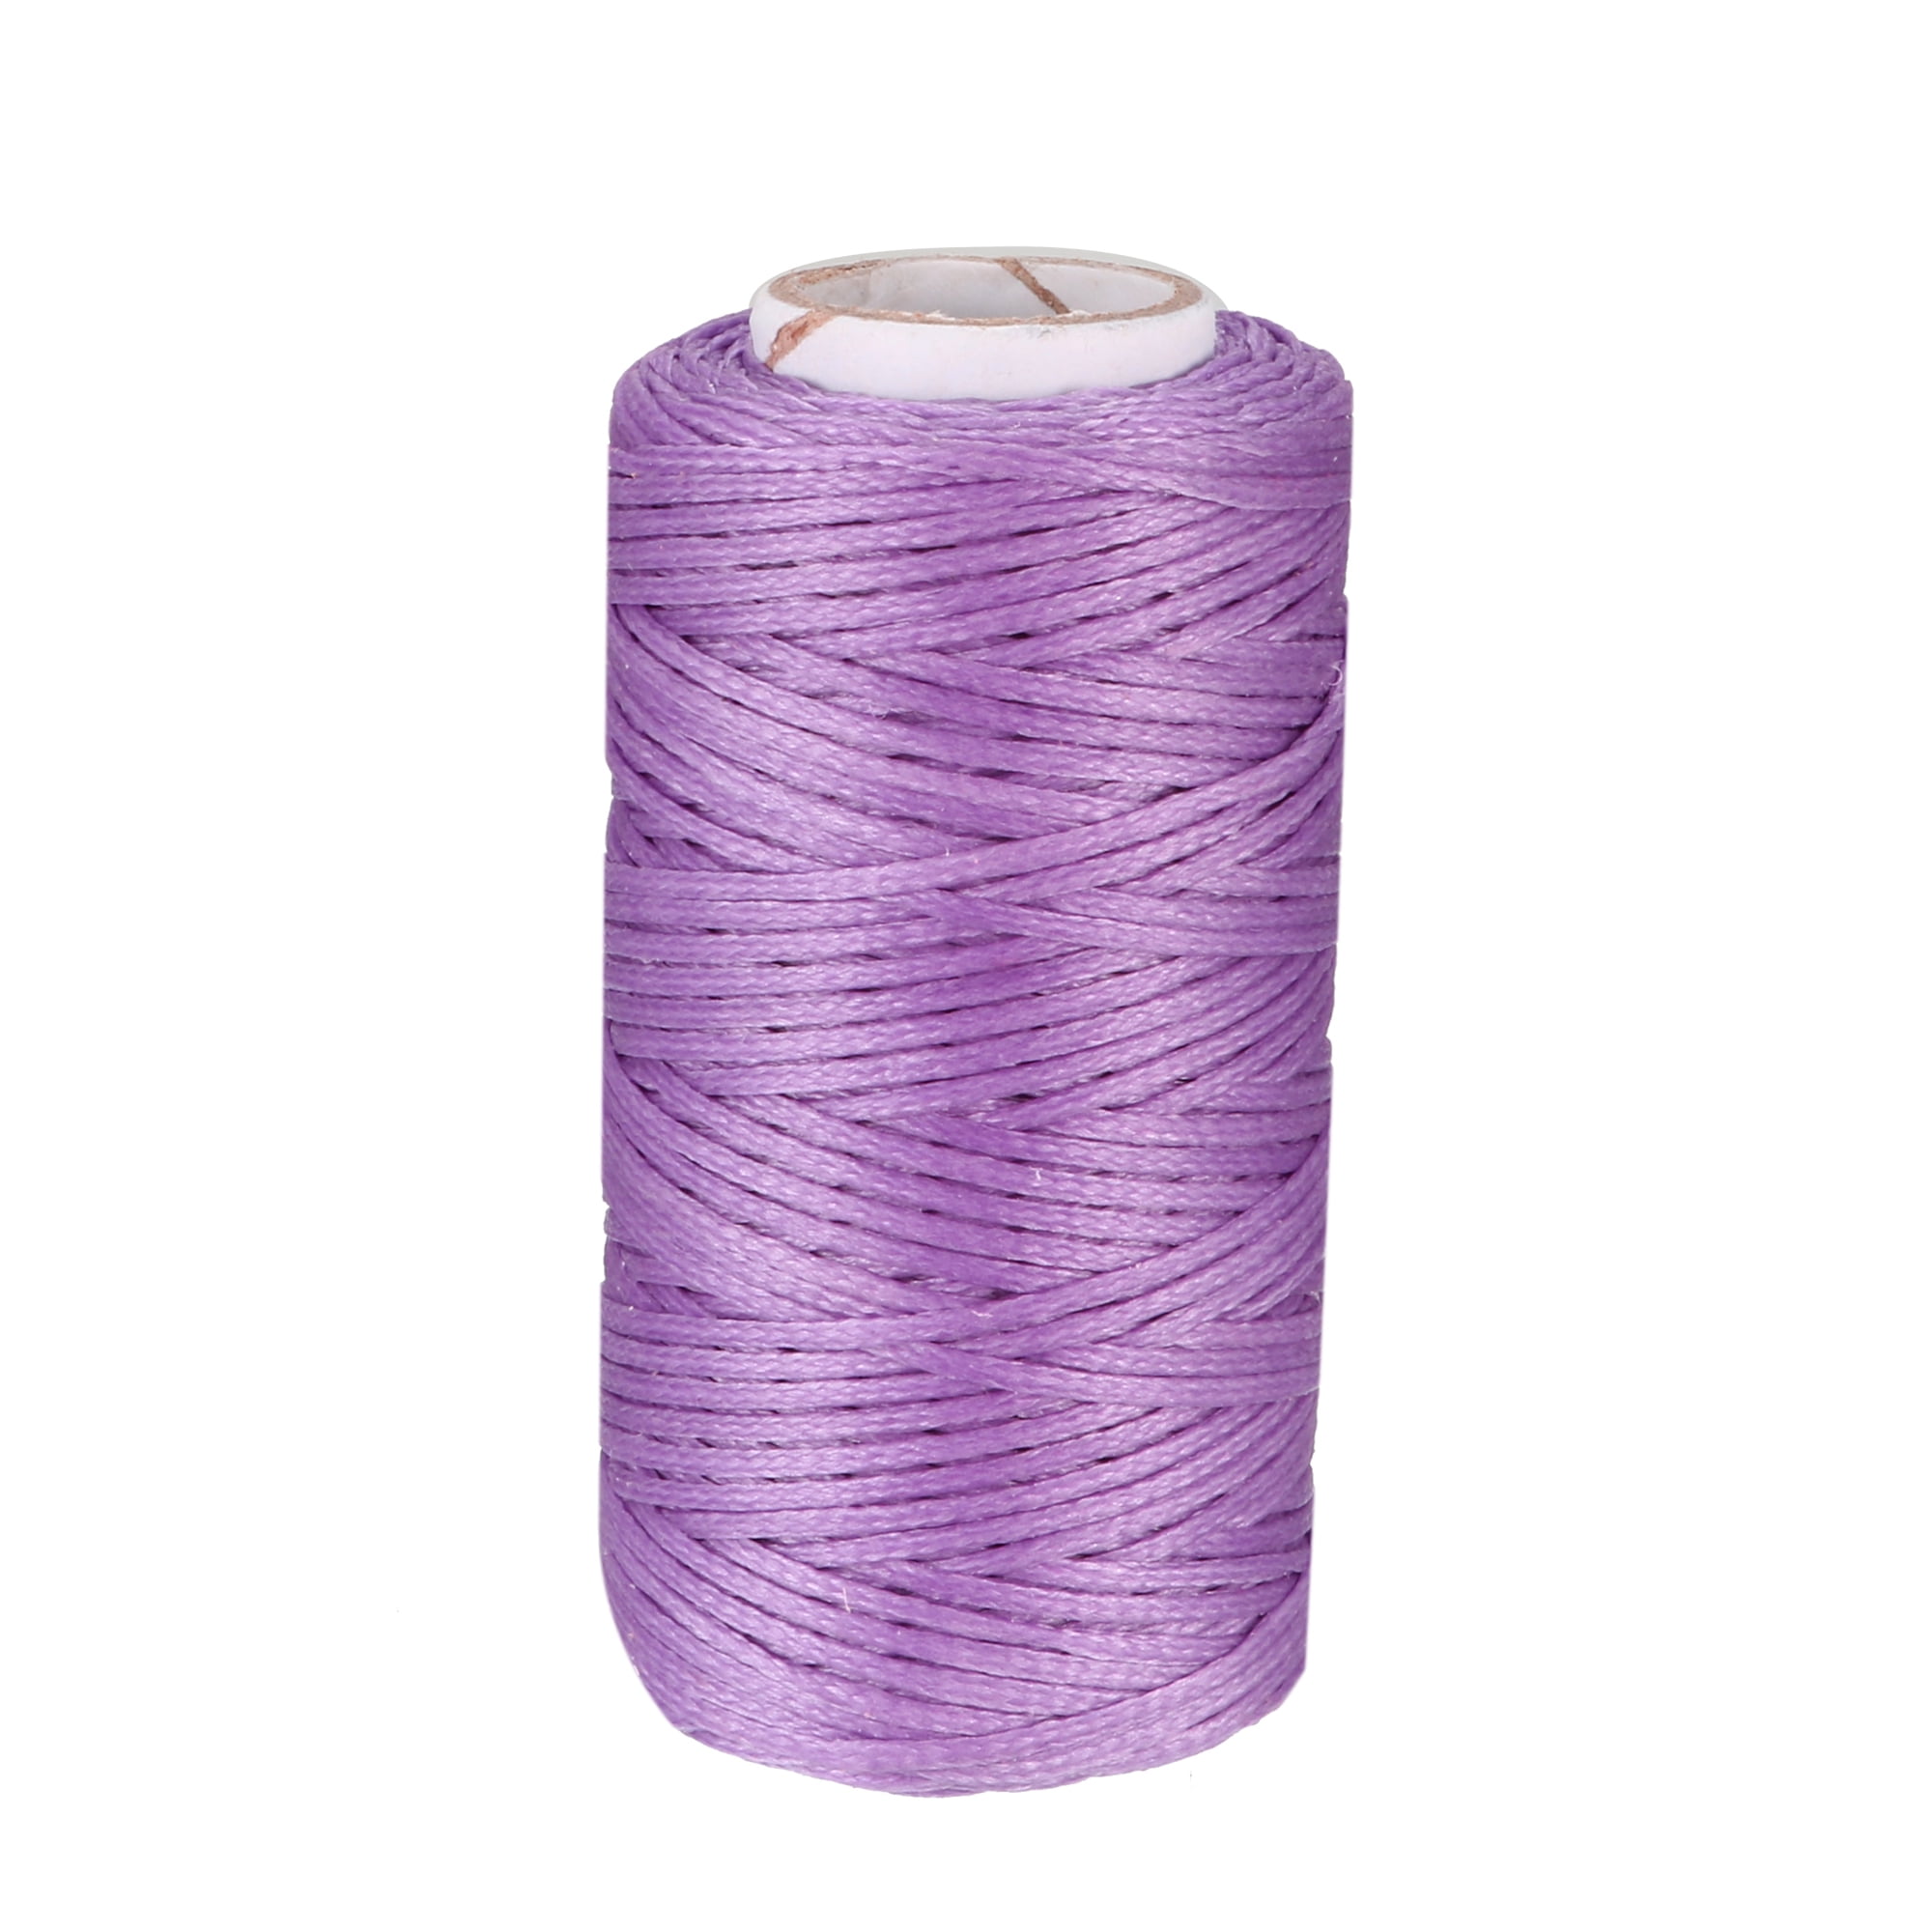 Uxcell Sewing Stitching Waxed Thread Cord Leather Light Purple 1pcs ...